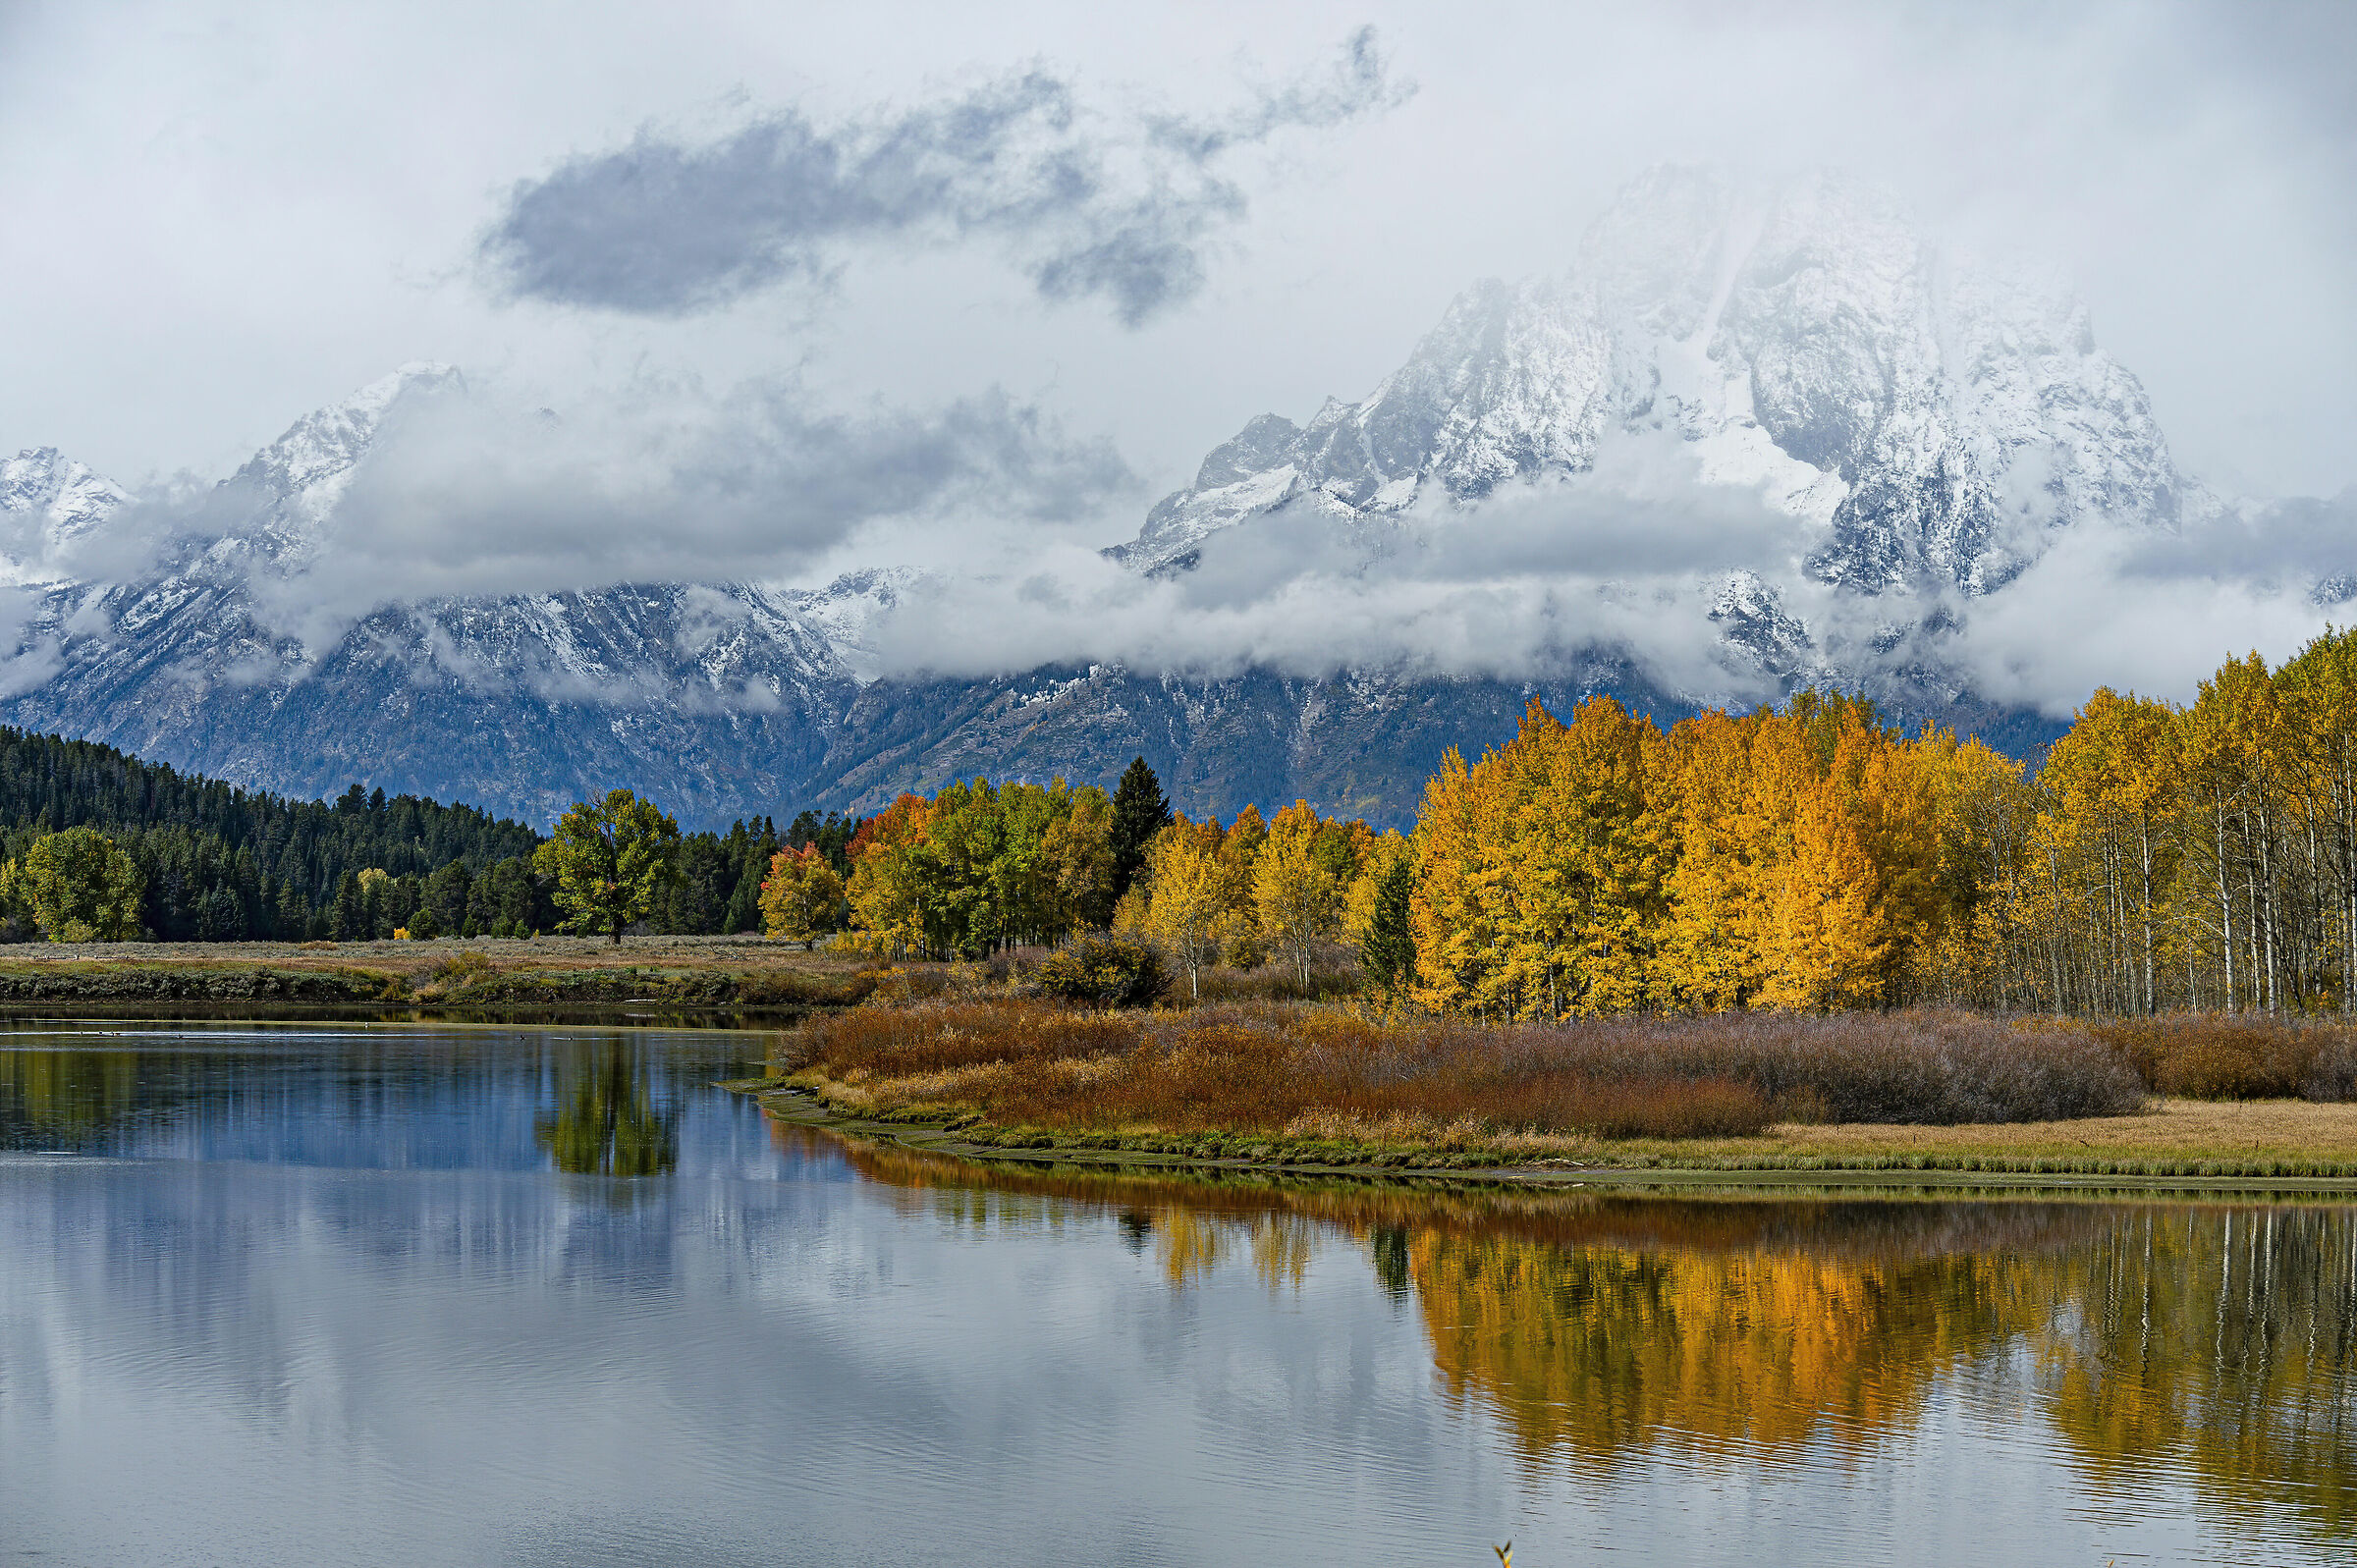 OXBOW BEND...